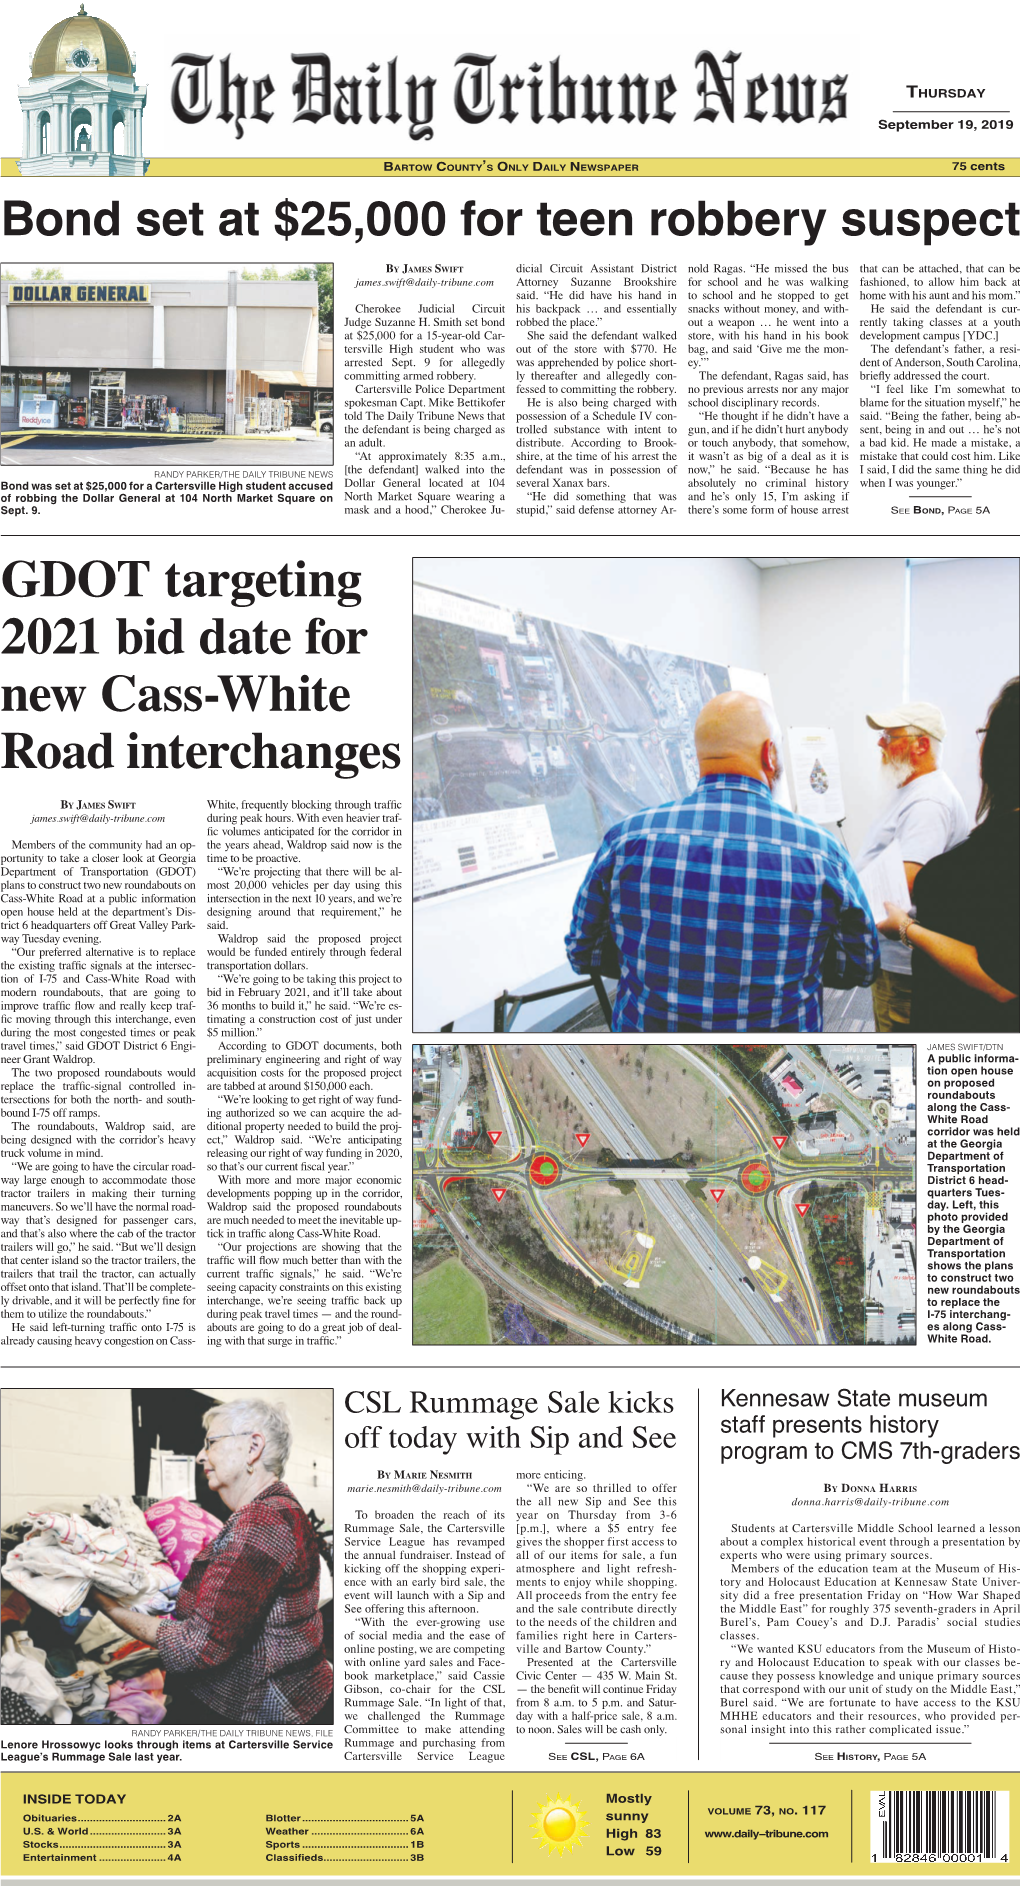 GDOT Targeting 2021 Bid Date for New Cass-White Road Interchanges